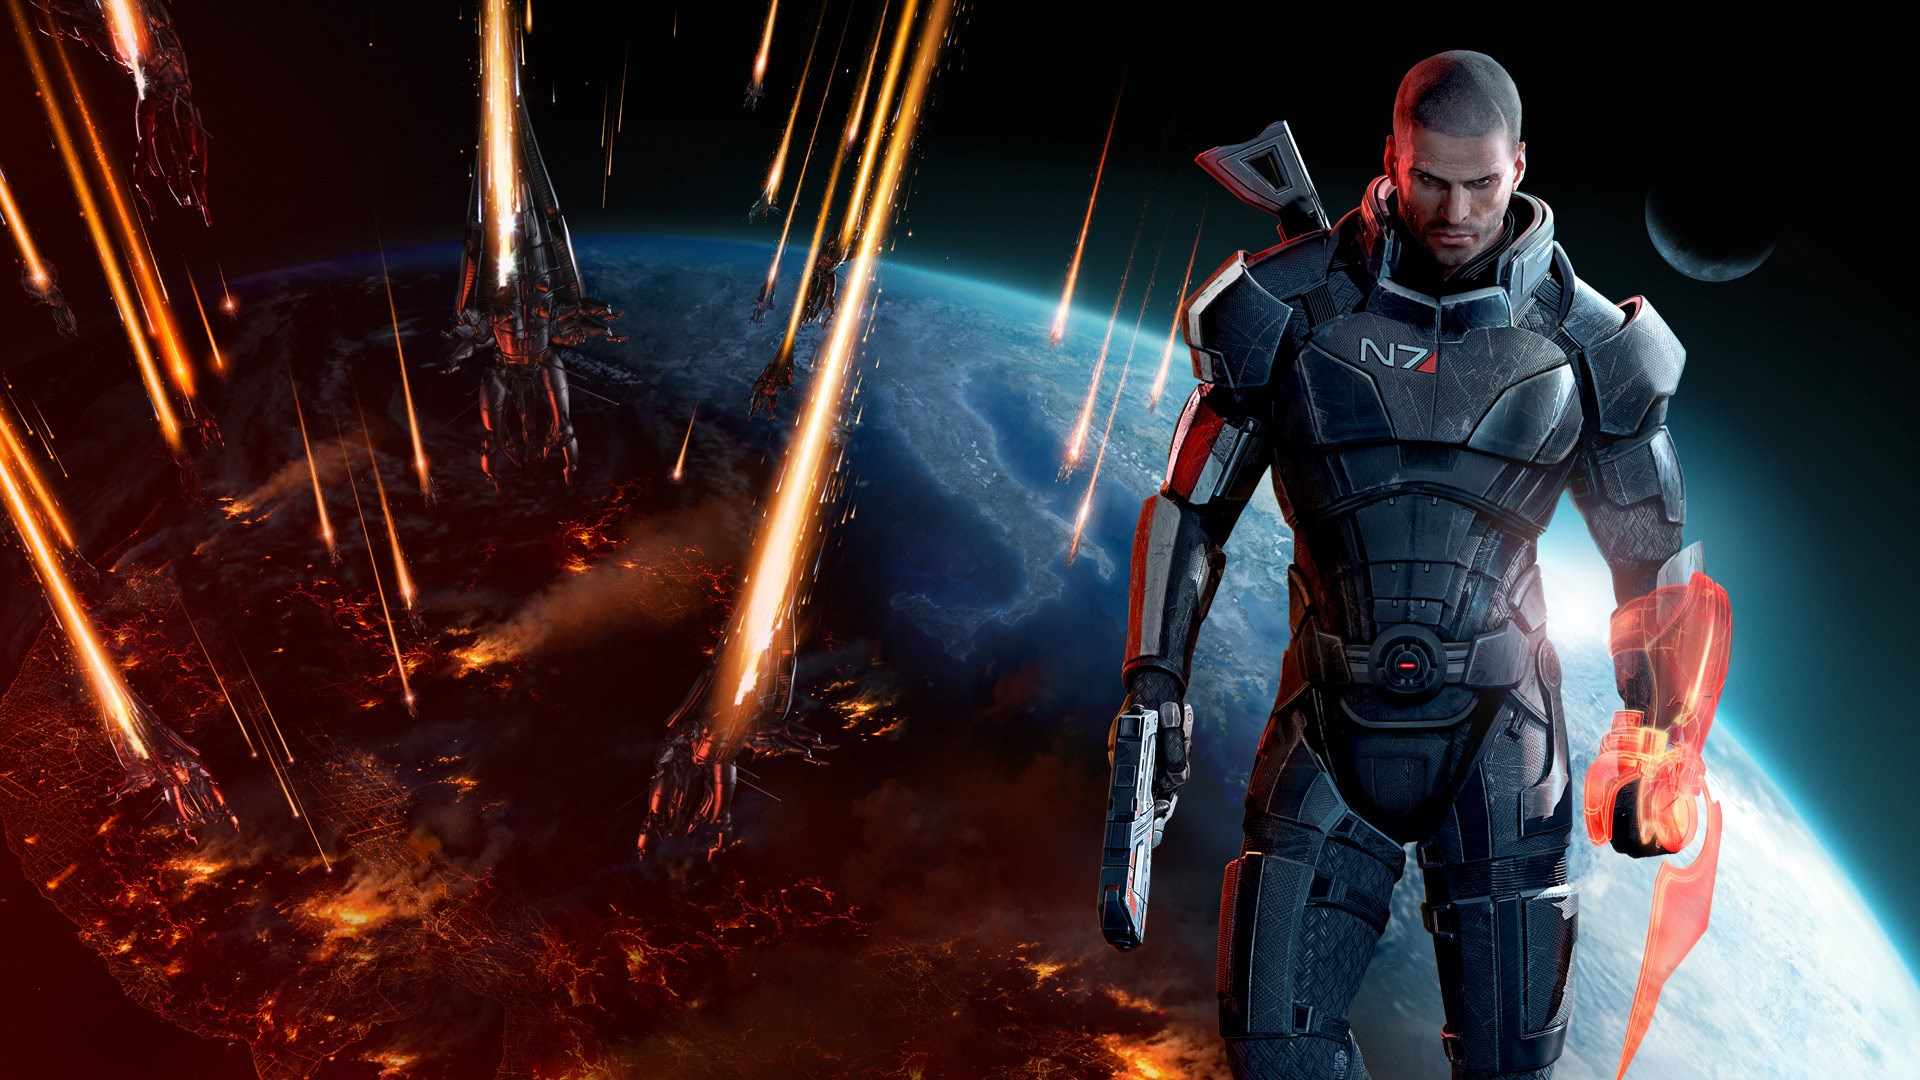 Mass Effect 3 - Reaper Chase in Galaxy Map 